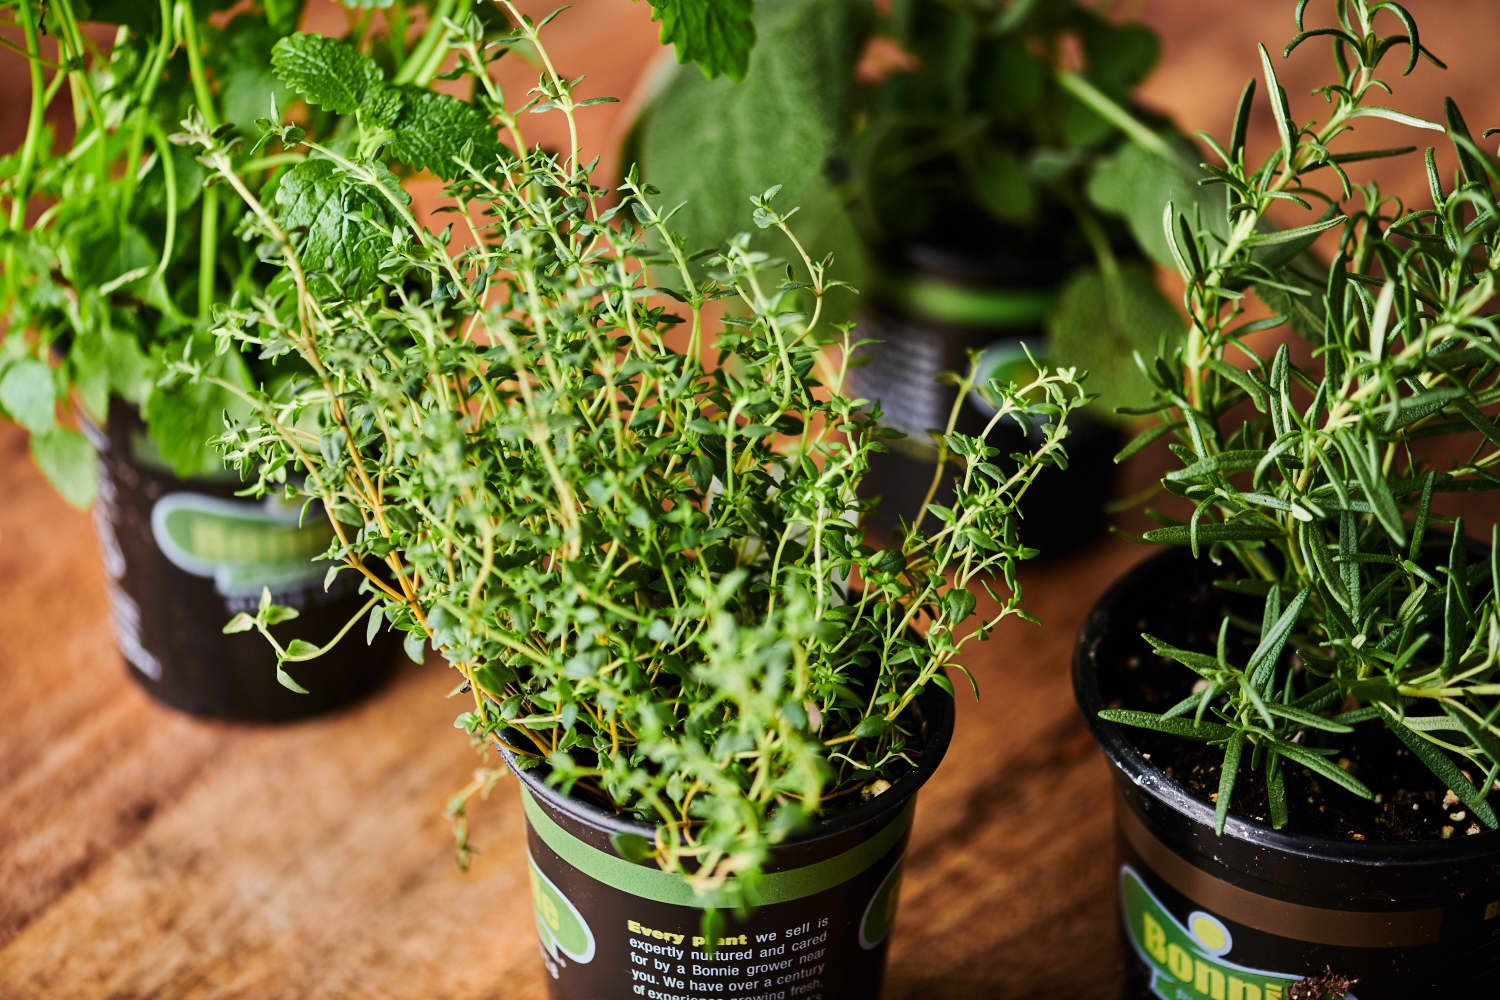 6 Things Everyone Should Know About Buying Potted Herbs from the Grocery Store